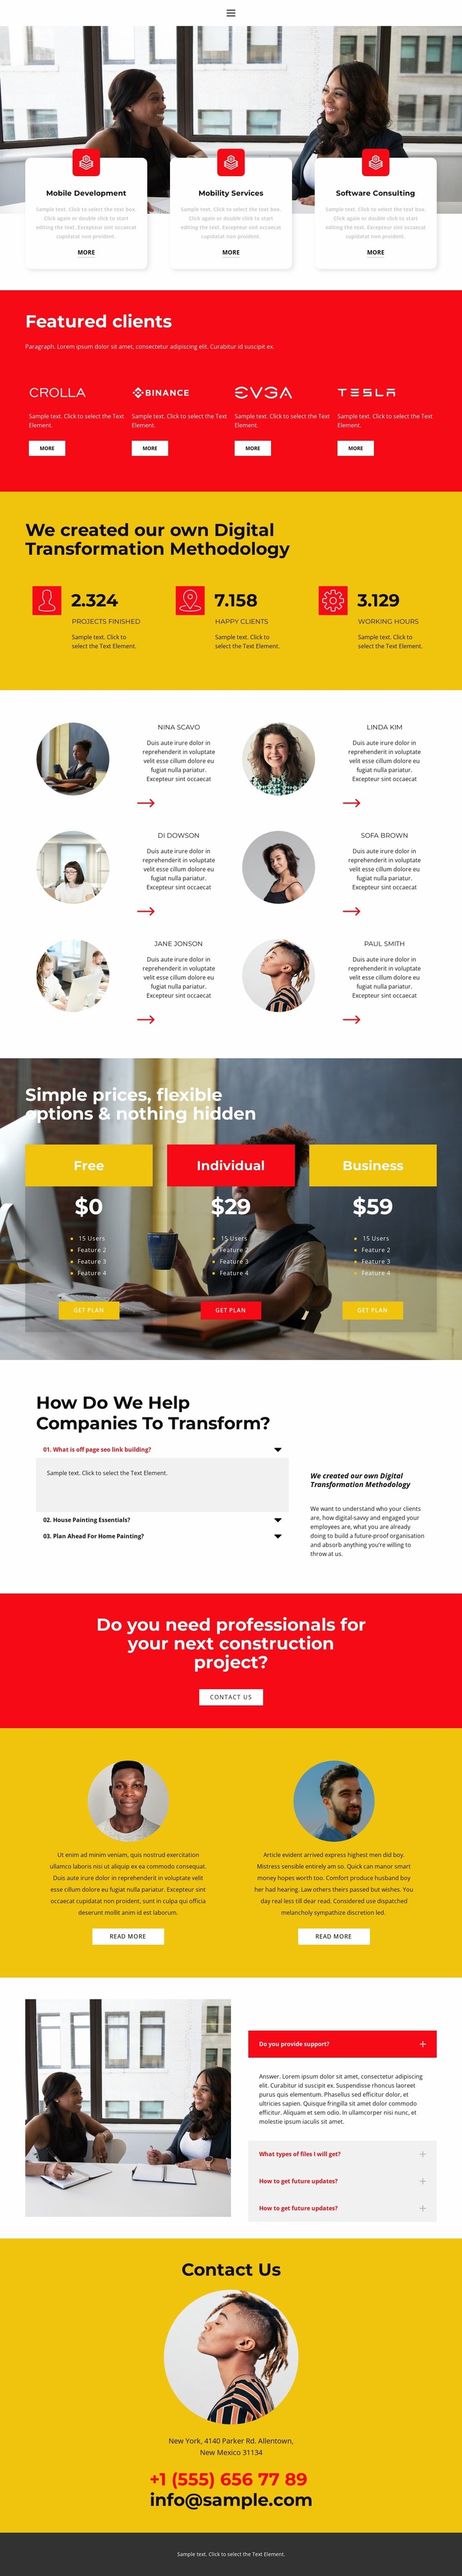 One of the successful projects Website Builder Templates